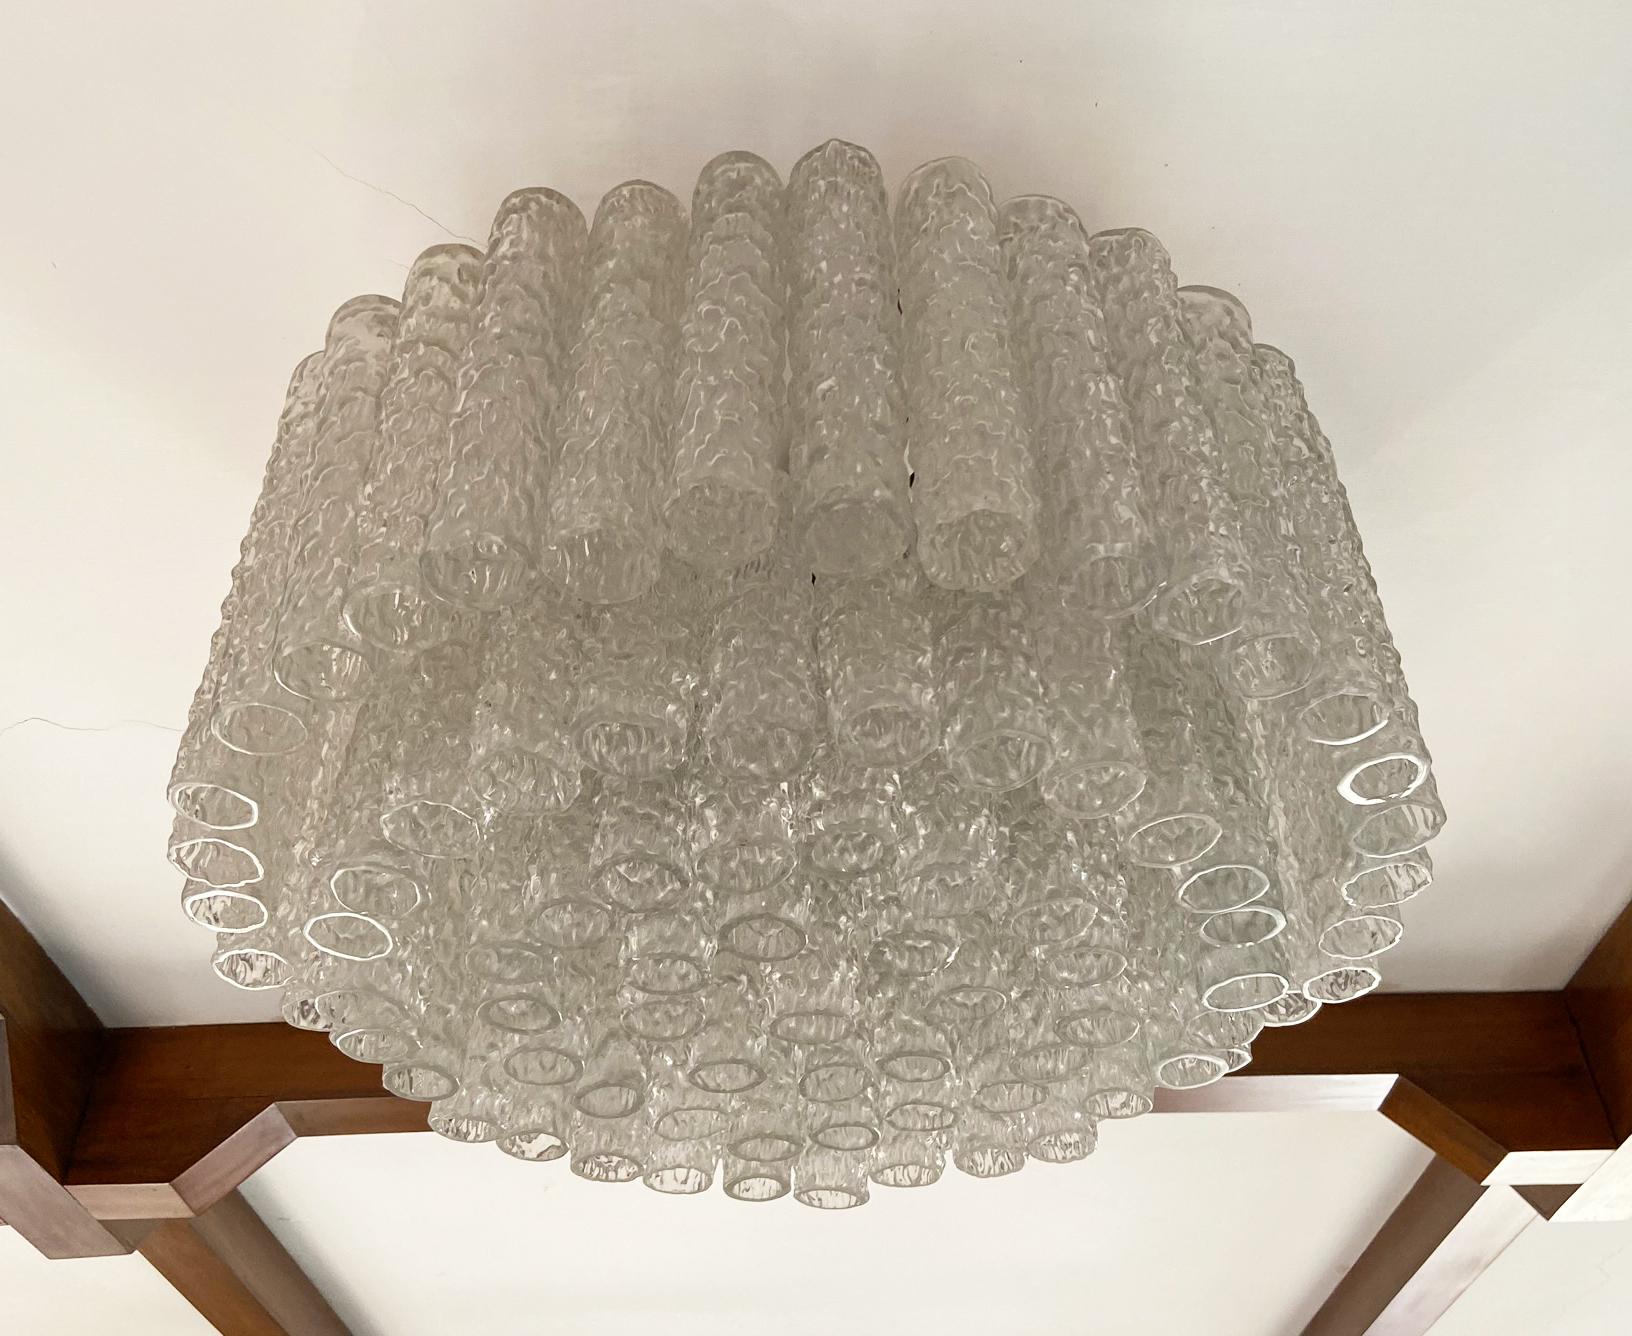 This large Murano glass chandelier from Venini is the Corteccia model designed by Toni Zuccheri.